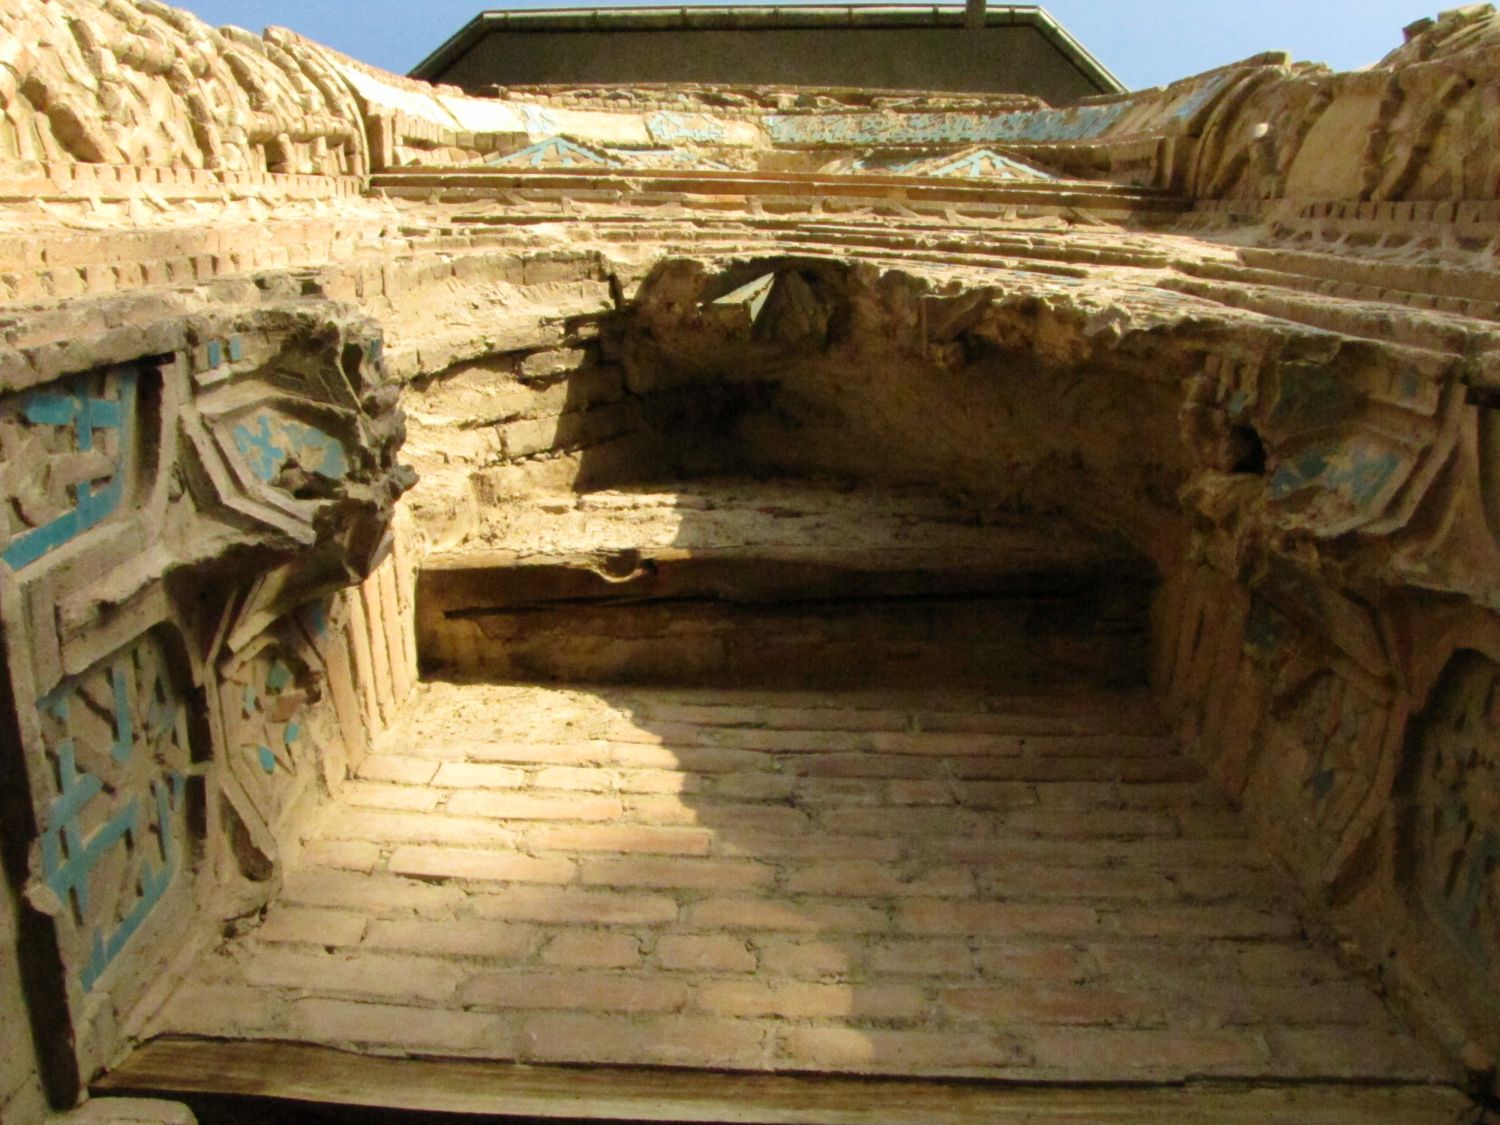 View up at top of portal, from under its outer edge, at damaged muqarnas, partially glazed tiles and brickwork